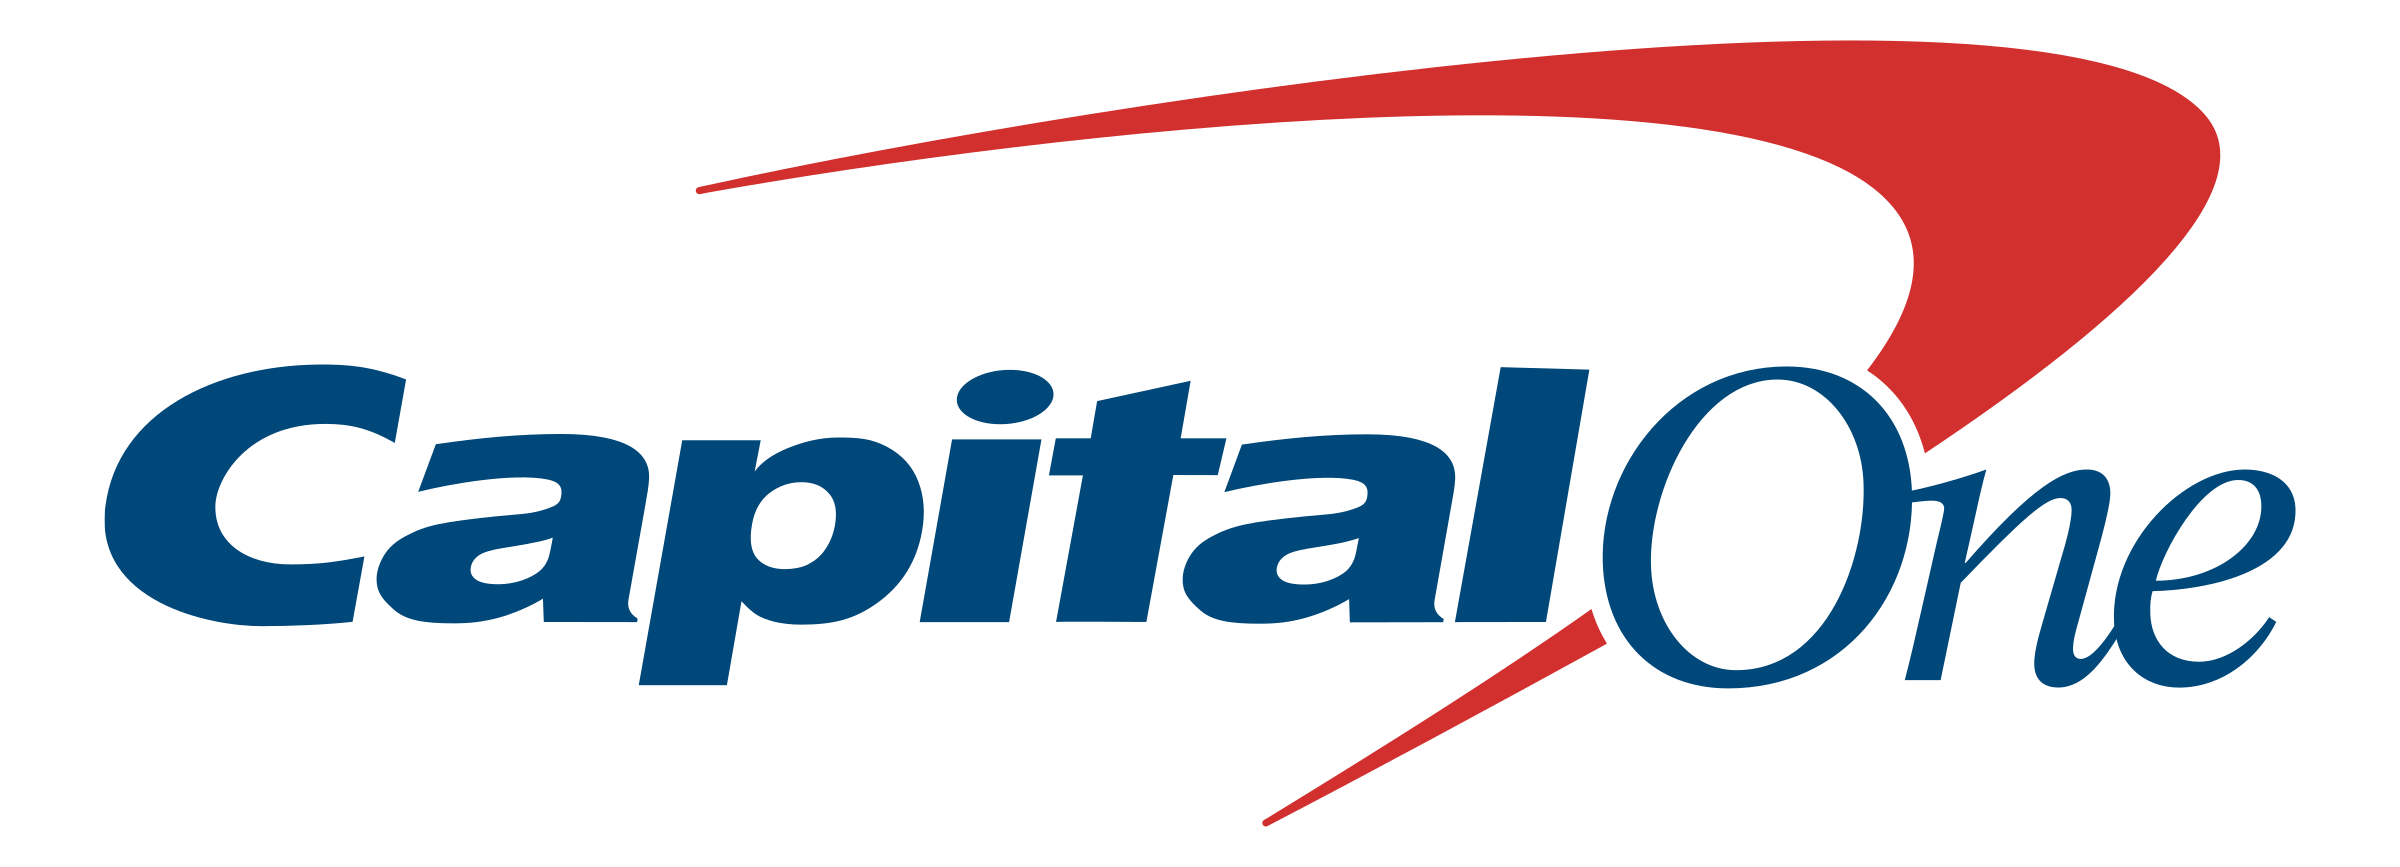 Offer image for Capital One 360 CD